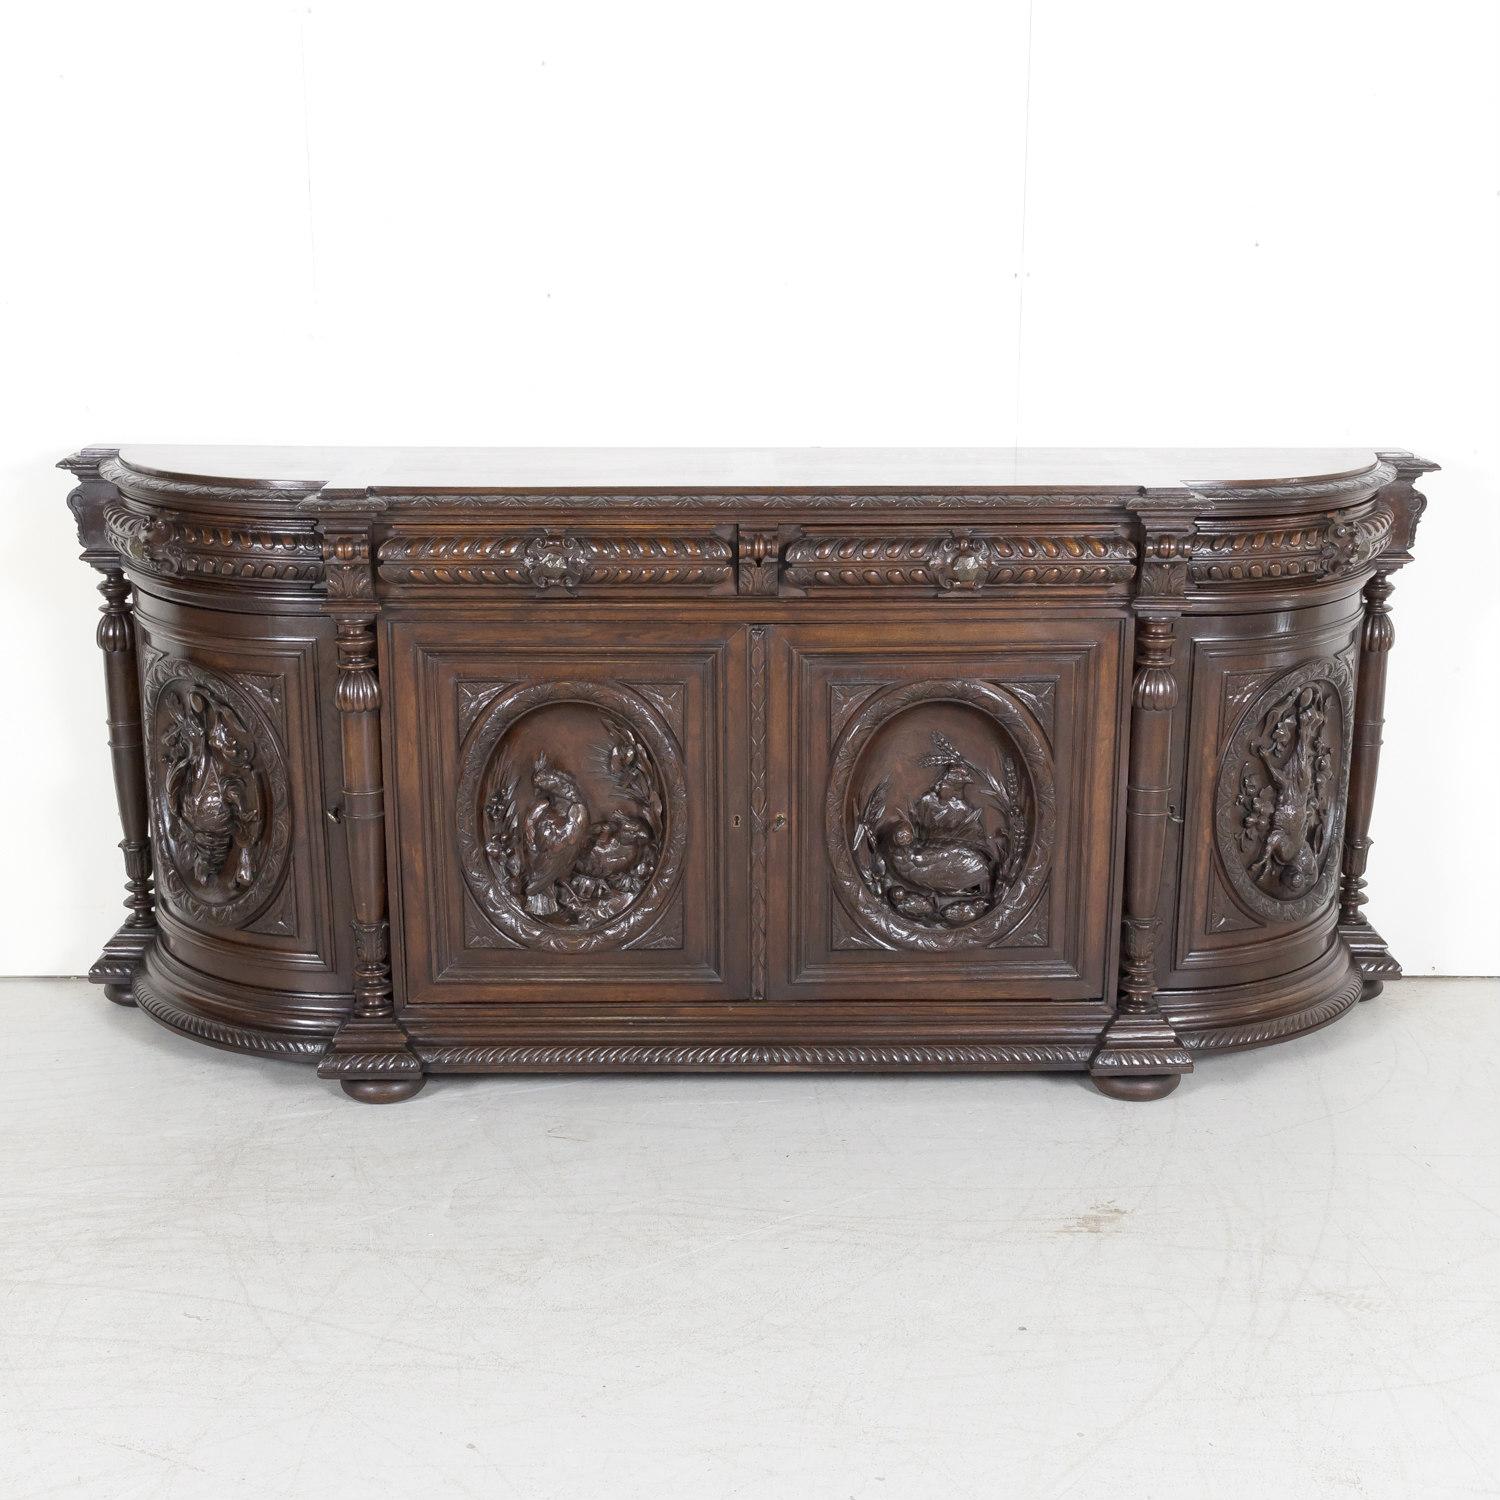 An impressive large 19th century Louis XIII style demilune hunt enfilade buffet handcrafted from solid old growth oak by an expert ébéniste in the Normandy region, circa 1880s. This handsome French Renaissance buffet found in a hunting lodge near